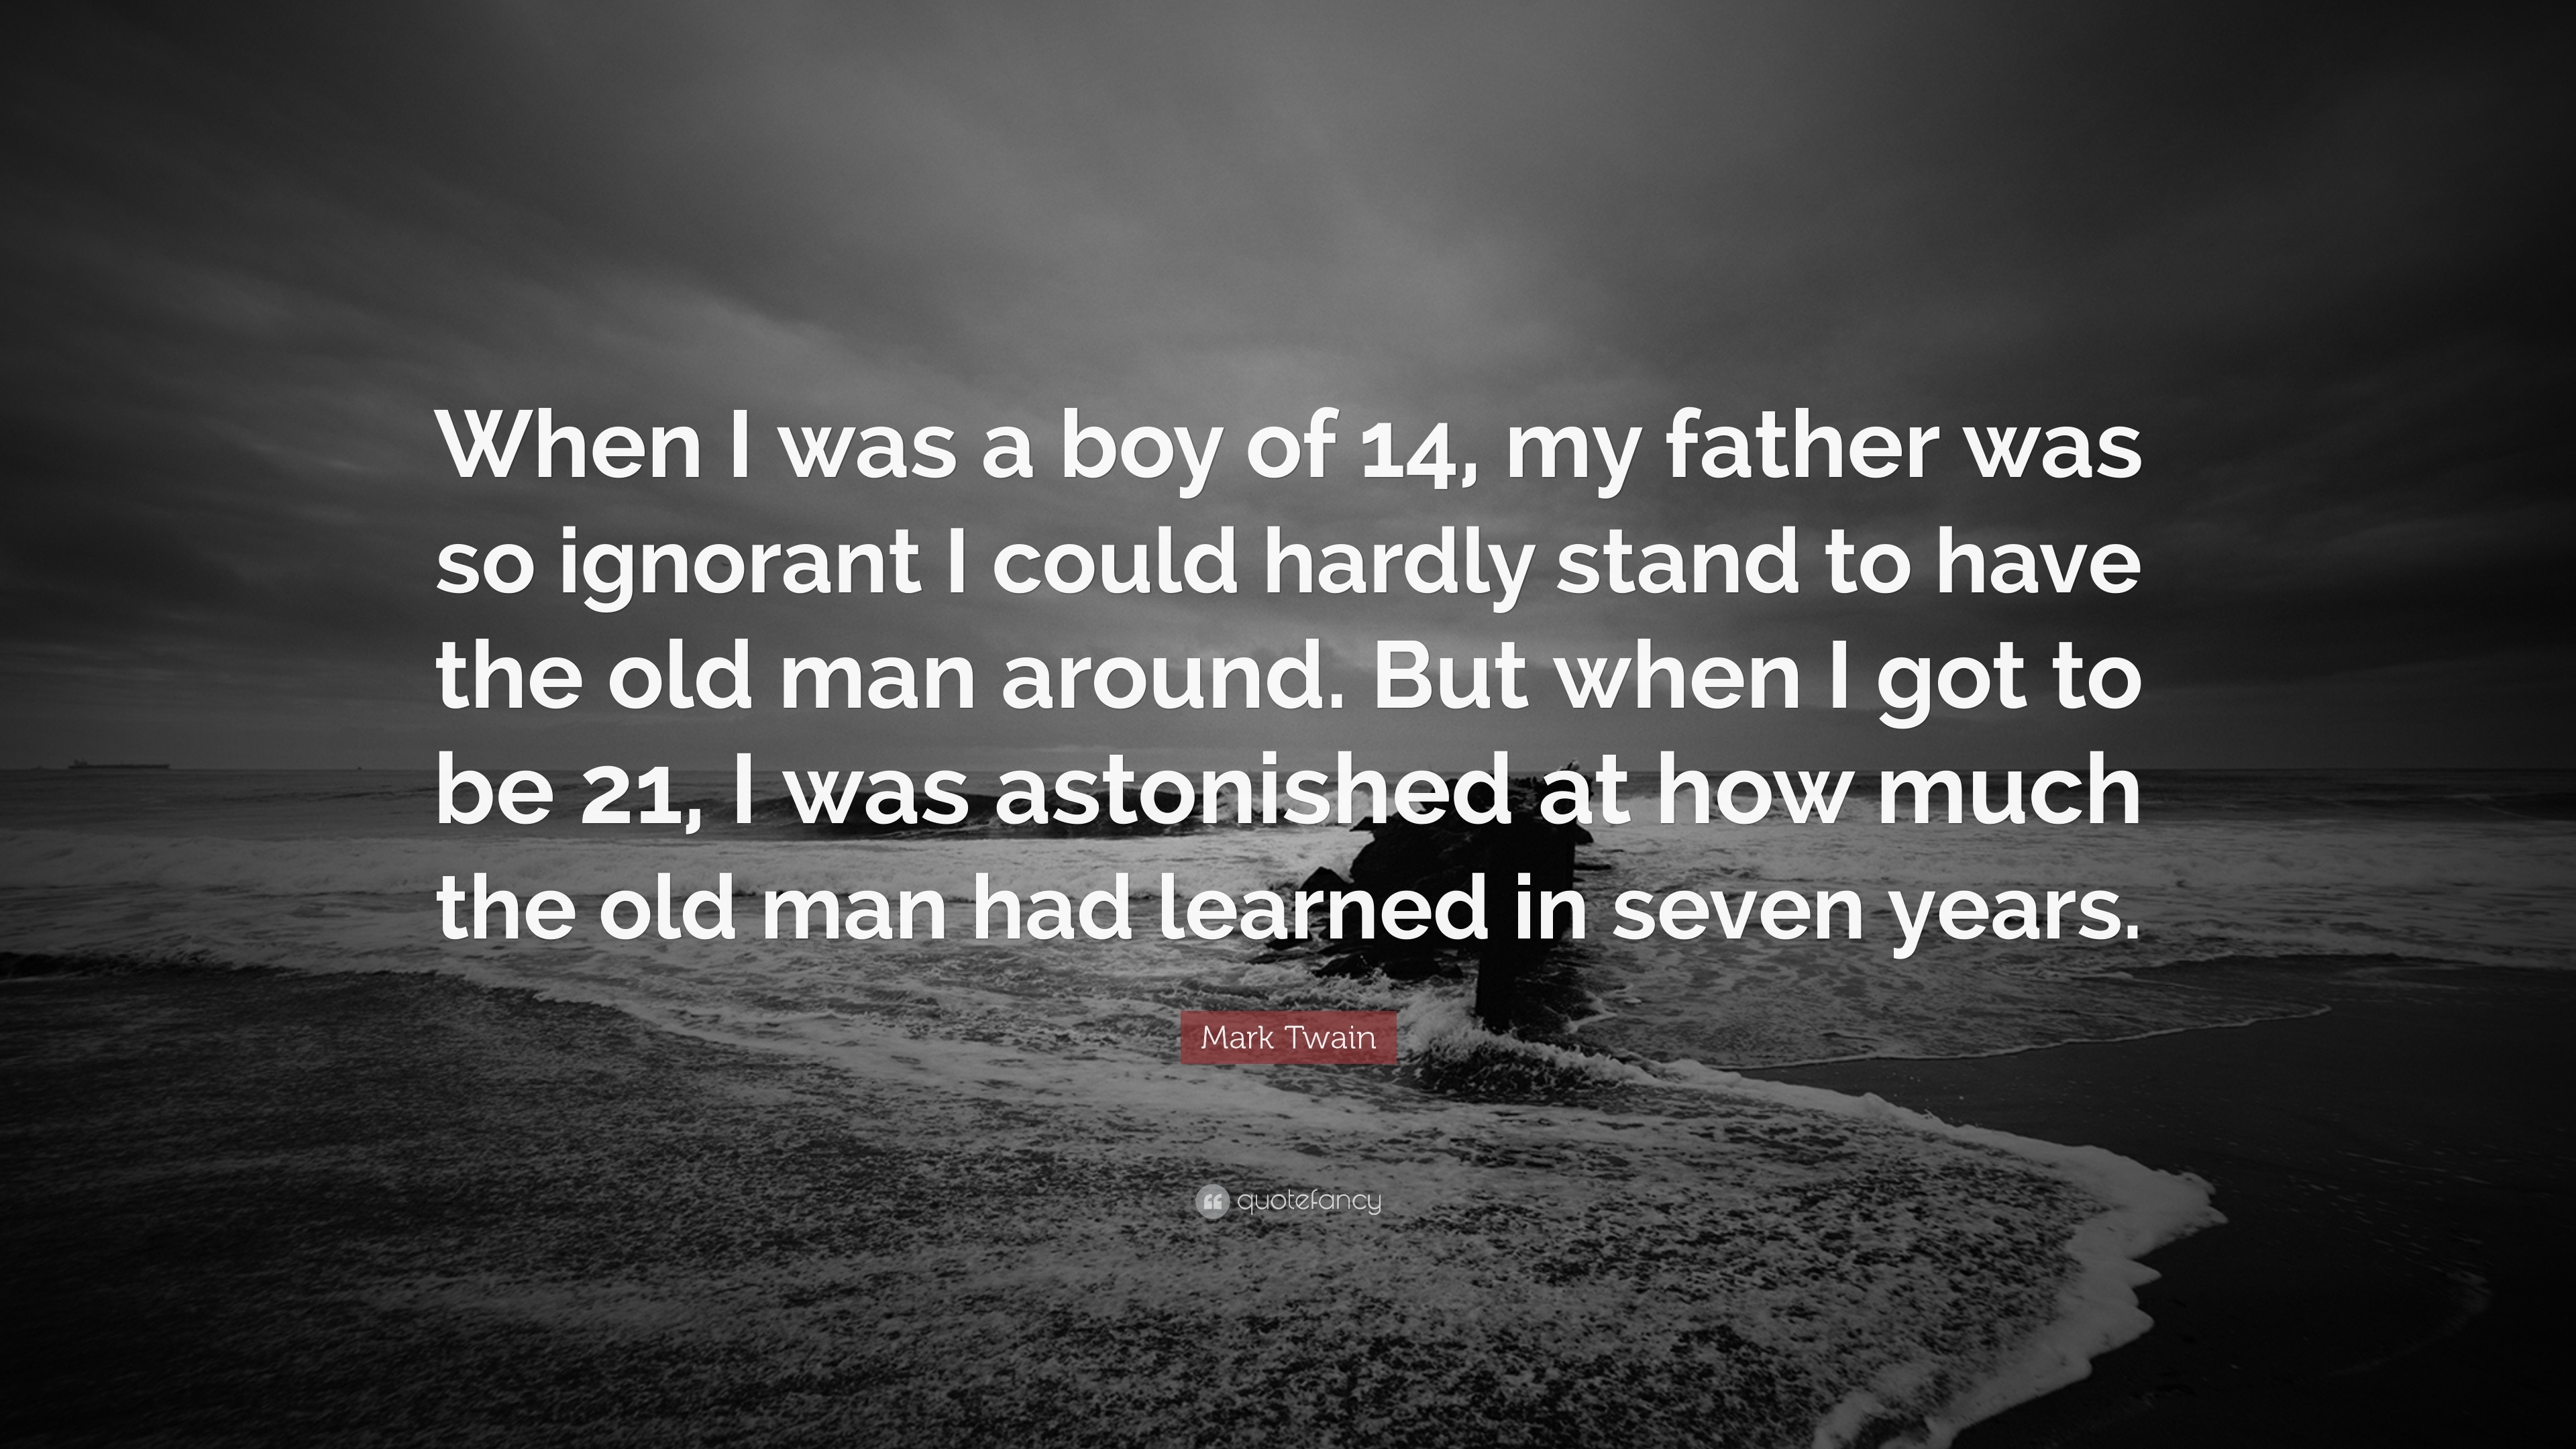 Mark Twain Quote “When I was a boy of 14 my father was